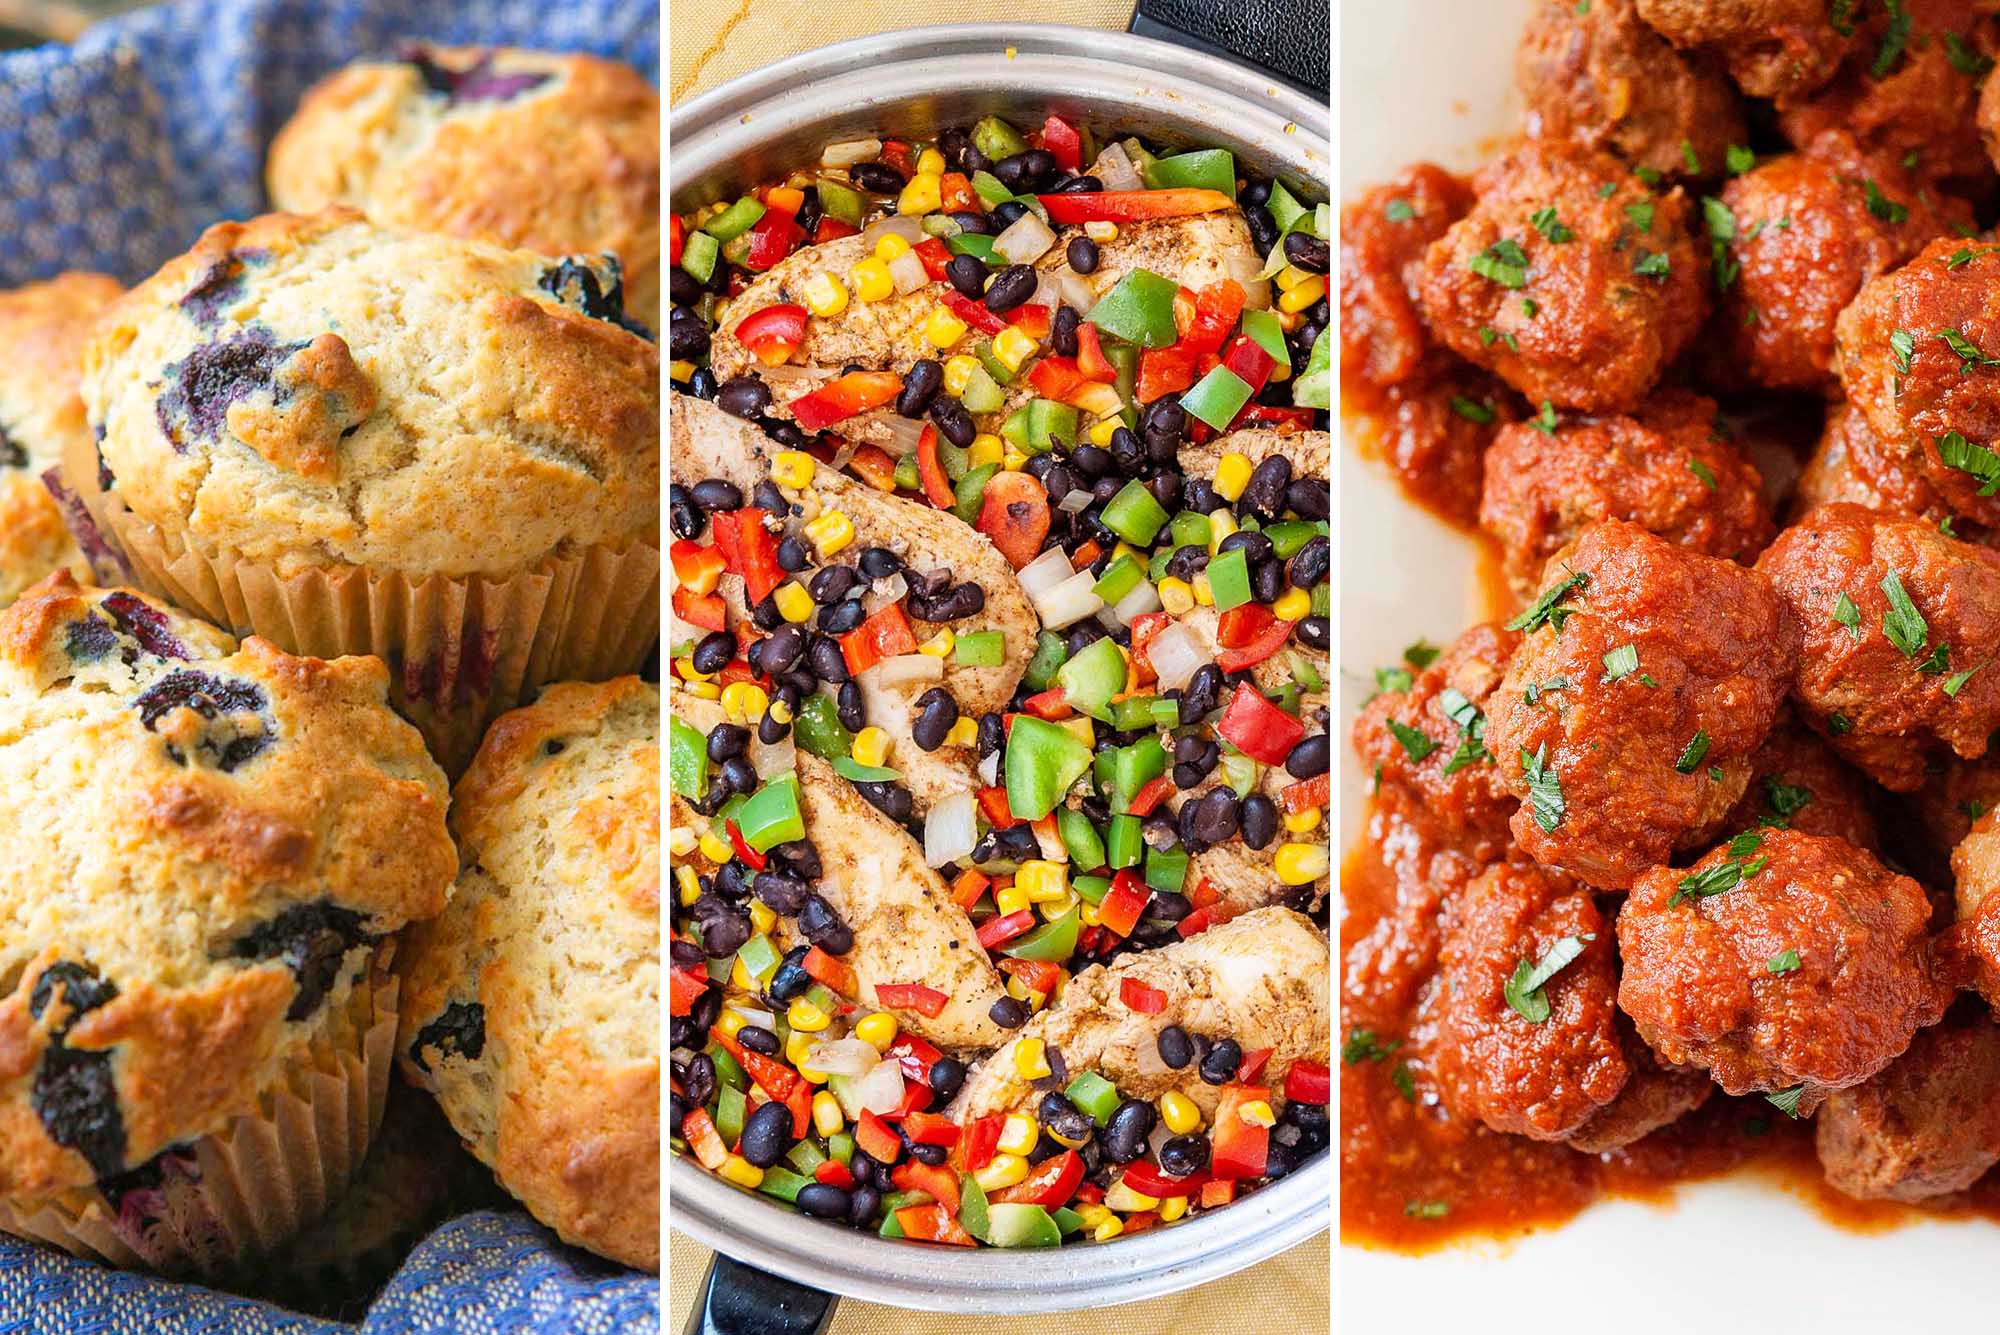 Three photos side by side. On the left is a linen lined basket with blueberry muffins inside. The center photo is a skillet with Southwest Skillet Chicken with Beans and Corn inside. The photo on the right are sauce covered meatballs sprinkled with parsley.